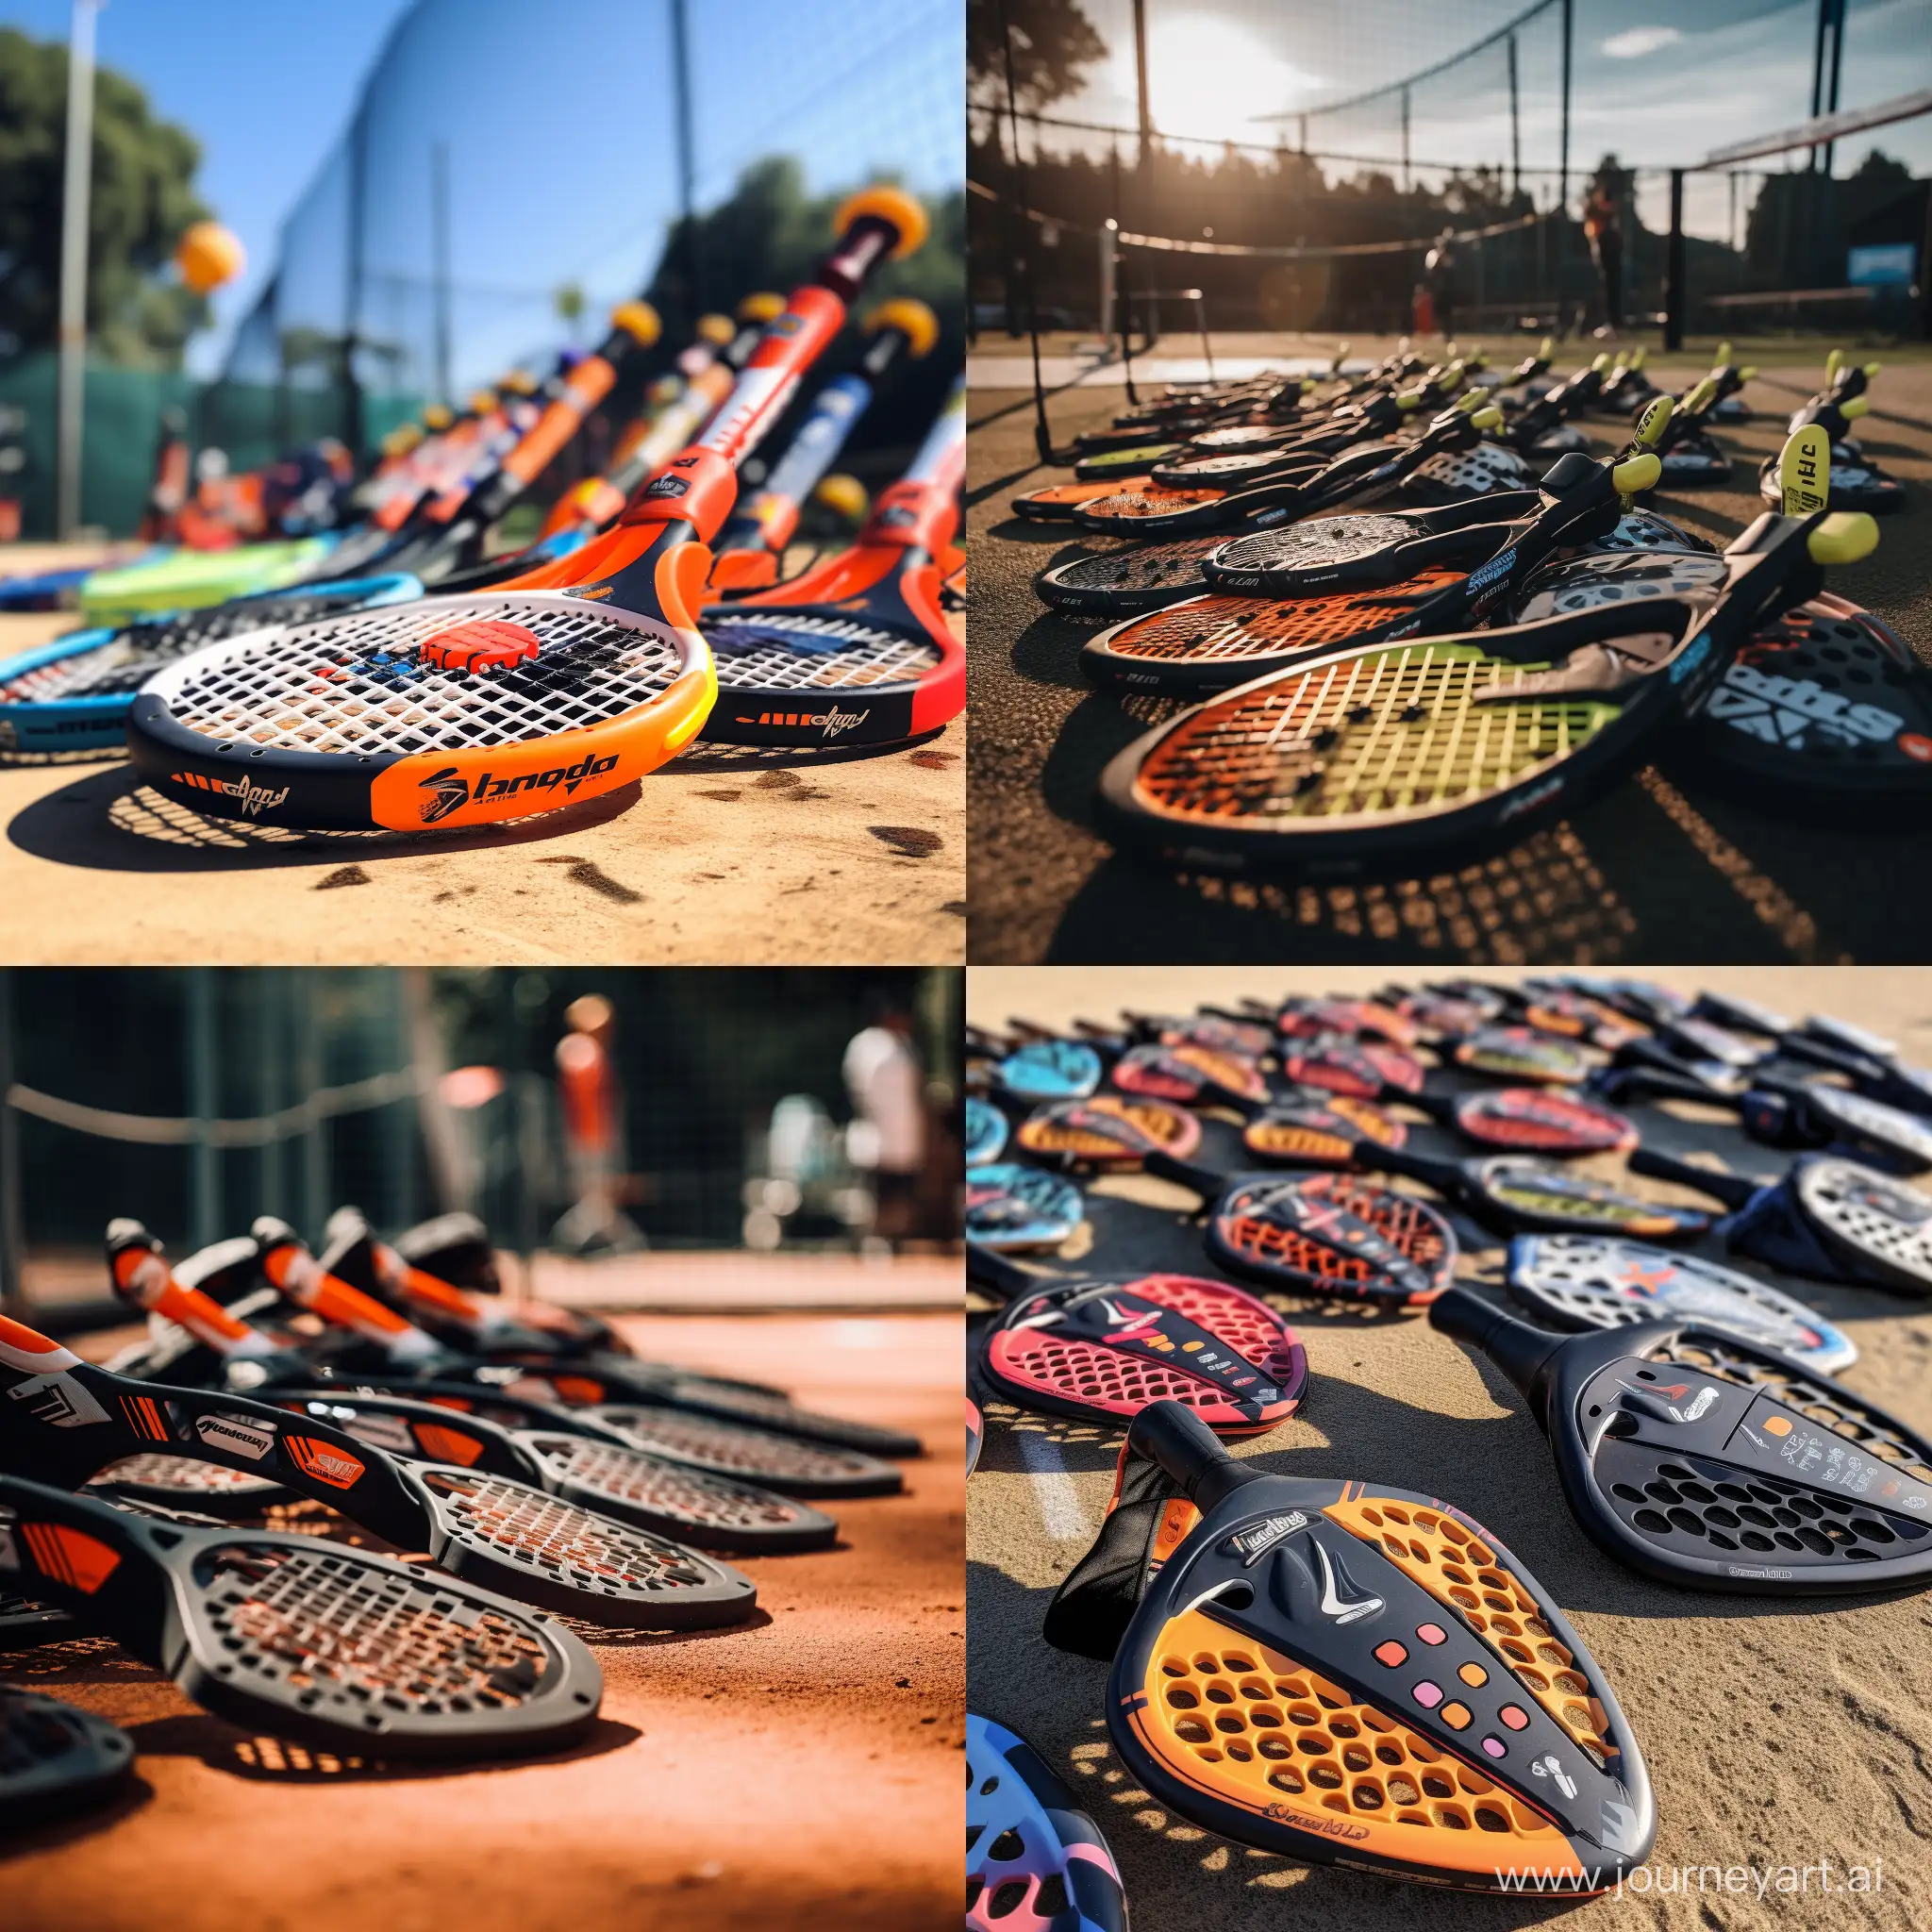 Colorful-Padel-Rackets-Arranged-on-the-Court-Ground-in-a-Symmetrical-Display